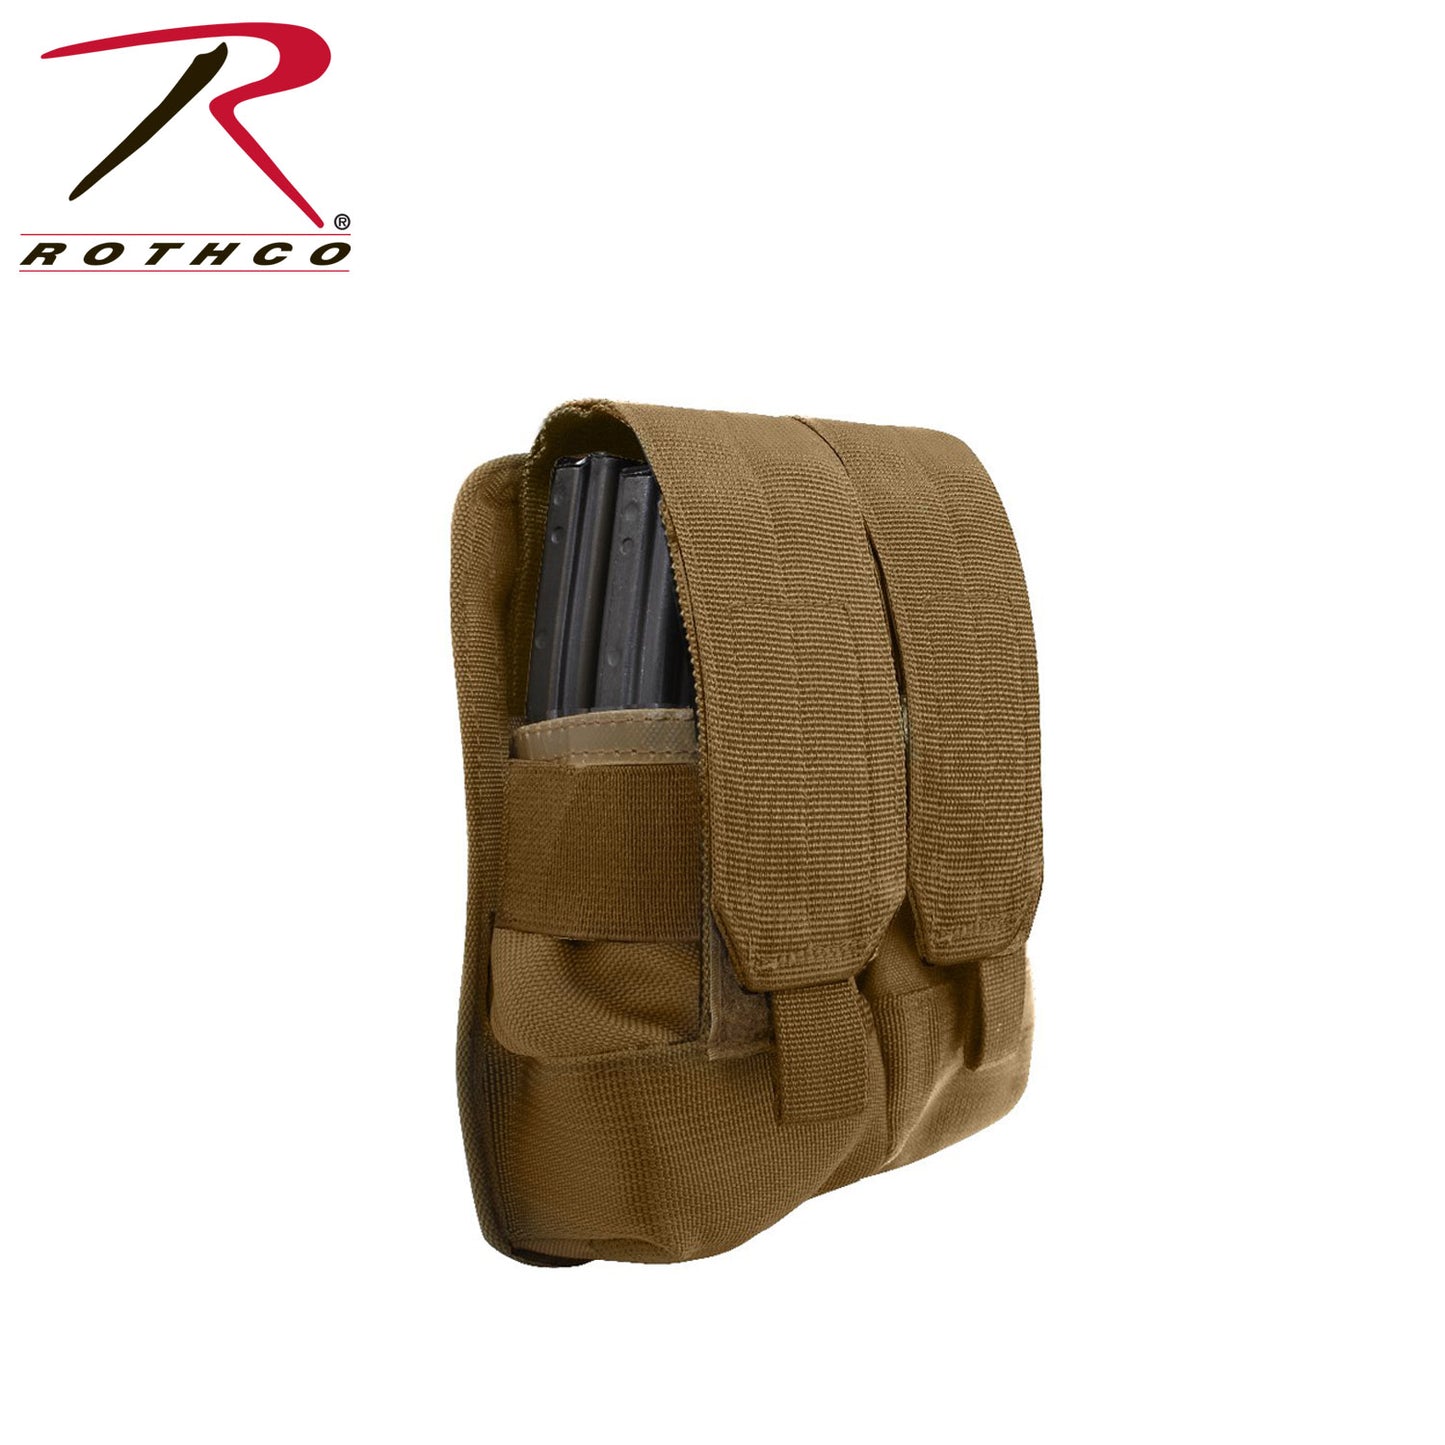 MOLLE Universal Double Rifle Mag Pouch